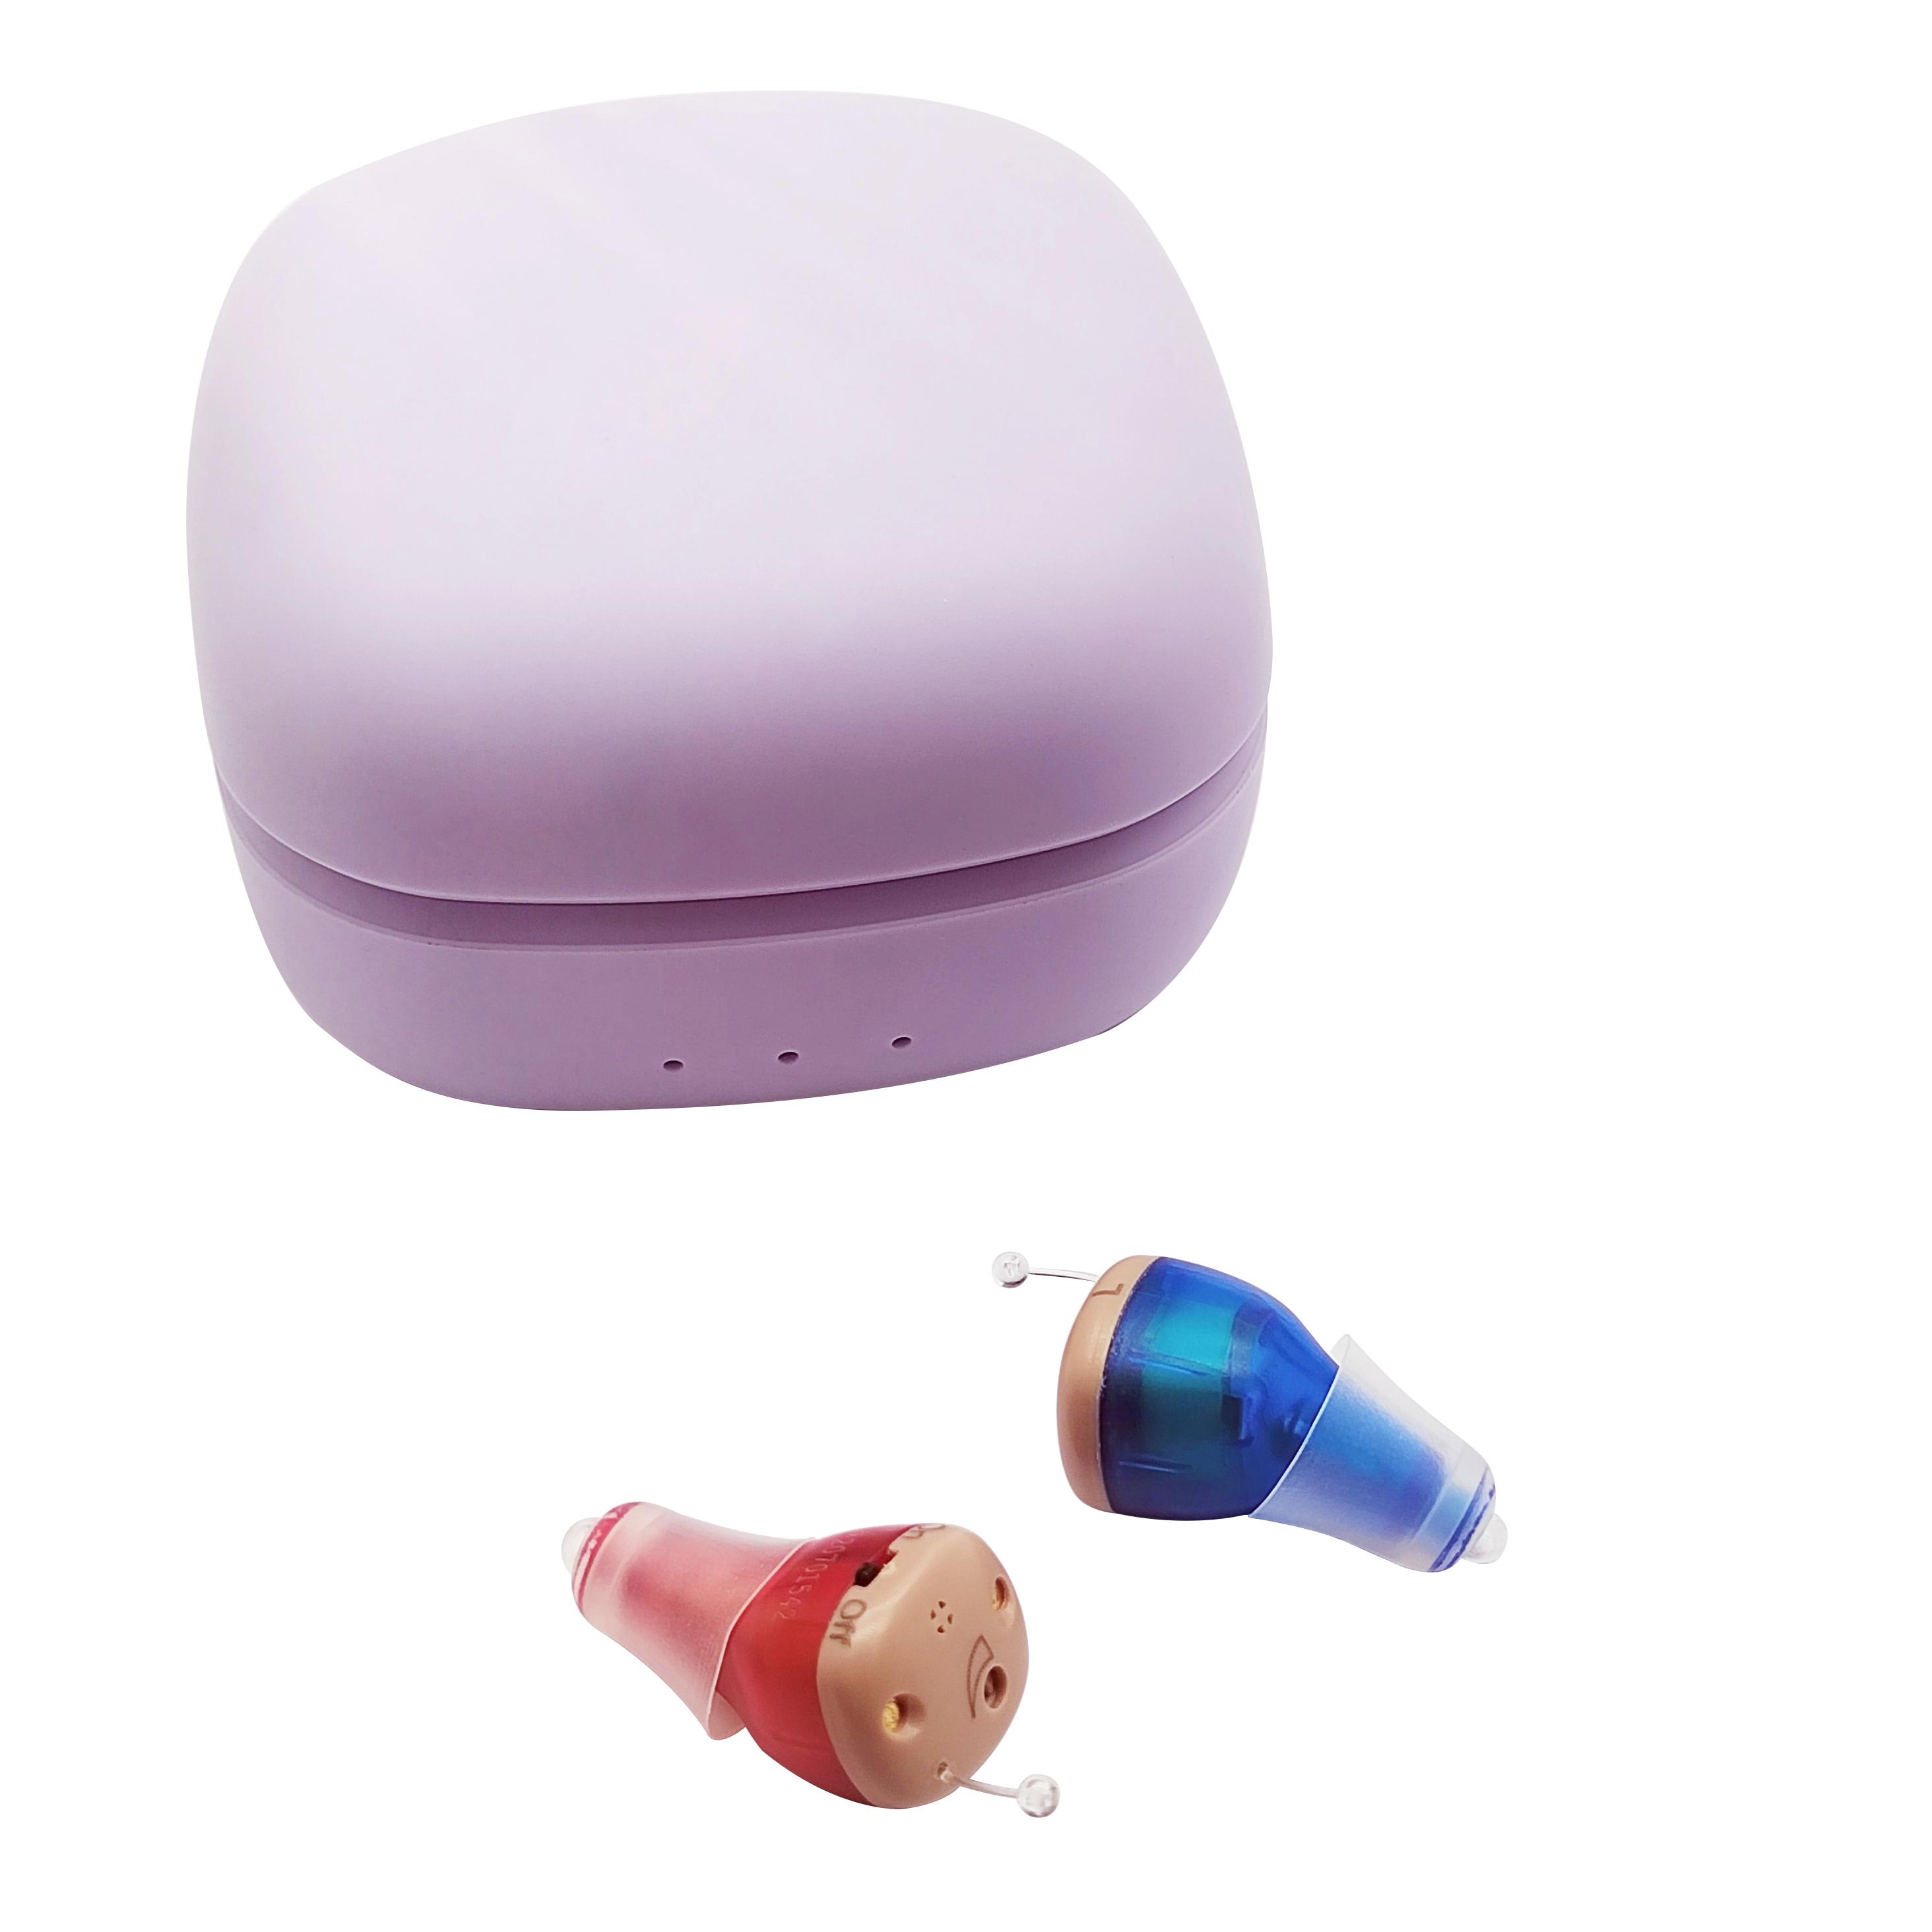 Hearing aids with purple and white boxes